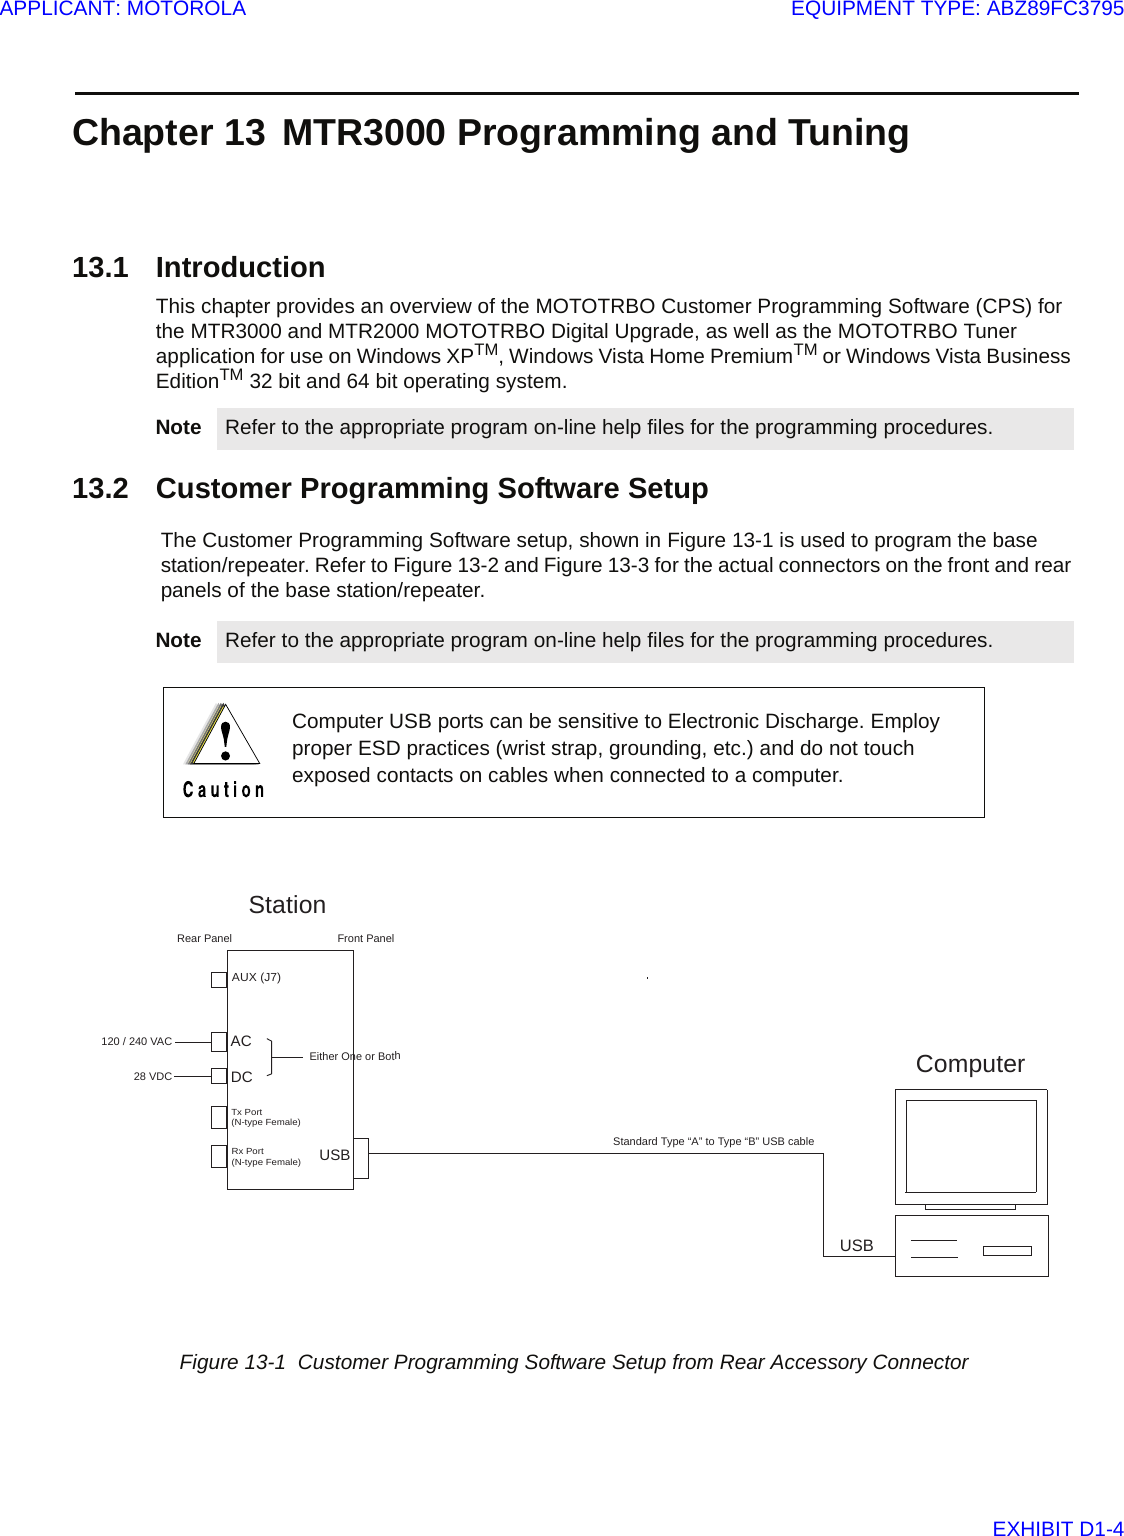 Chapter 13 MTR3000 Programming and Tuning13.1 IntroductionThis chapter provides an overview of the MOTOTRBO Customer Programming Software (CPS) for the MTR3000 and MTR2000 MOTOTRBO Digital Upgrade, as well as the MOTOTRBO Tuner application for use on Windows XPTM, Windows Vista Home PremiumTM or Windows Vista Business EditionTM 32 bit and 64 bit operating system. 13.2 Customer Programming Software SetupThe Customer Programming Software setup, shown in Figure 13-1 is used to program the base station/repeater. Refer to Figure 13-2 and Figure 13-3 for the actual connectors on the front and rear panels of the base station/repeater.Note Refer to the appropriate program on-line help files for the programming procedures.Note Refer to the appropriate program on-line help files for the programming procedures.Computer USB ports can be sensitive to Electronic Discharge. Employ proper ESD practices (wrist strap, grounding, etc.) and do not touch exposed contacts on cables when connected to a computer.Figure 13-1  Customer Programming Software Setup from Rear Accessory ConnectorFront PanelUSBACUSB120 / 240 VACStationTx Port(N-type Female)Rx Port(N-type Female)AUX (J7)DC28 VDCEither One or BothStandard Type “A” to Type “B” USB cable Rear PanelComputerAPPLICANT: MOTOROLAEQUIPMENT TYPE: ABZ89FC3795EXHIBIT D1-4